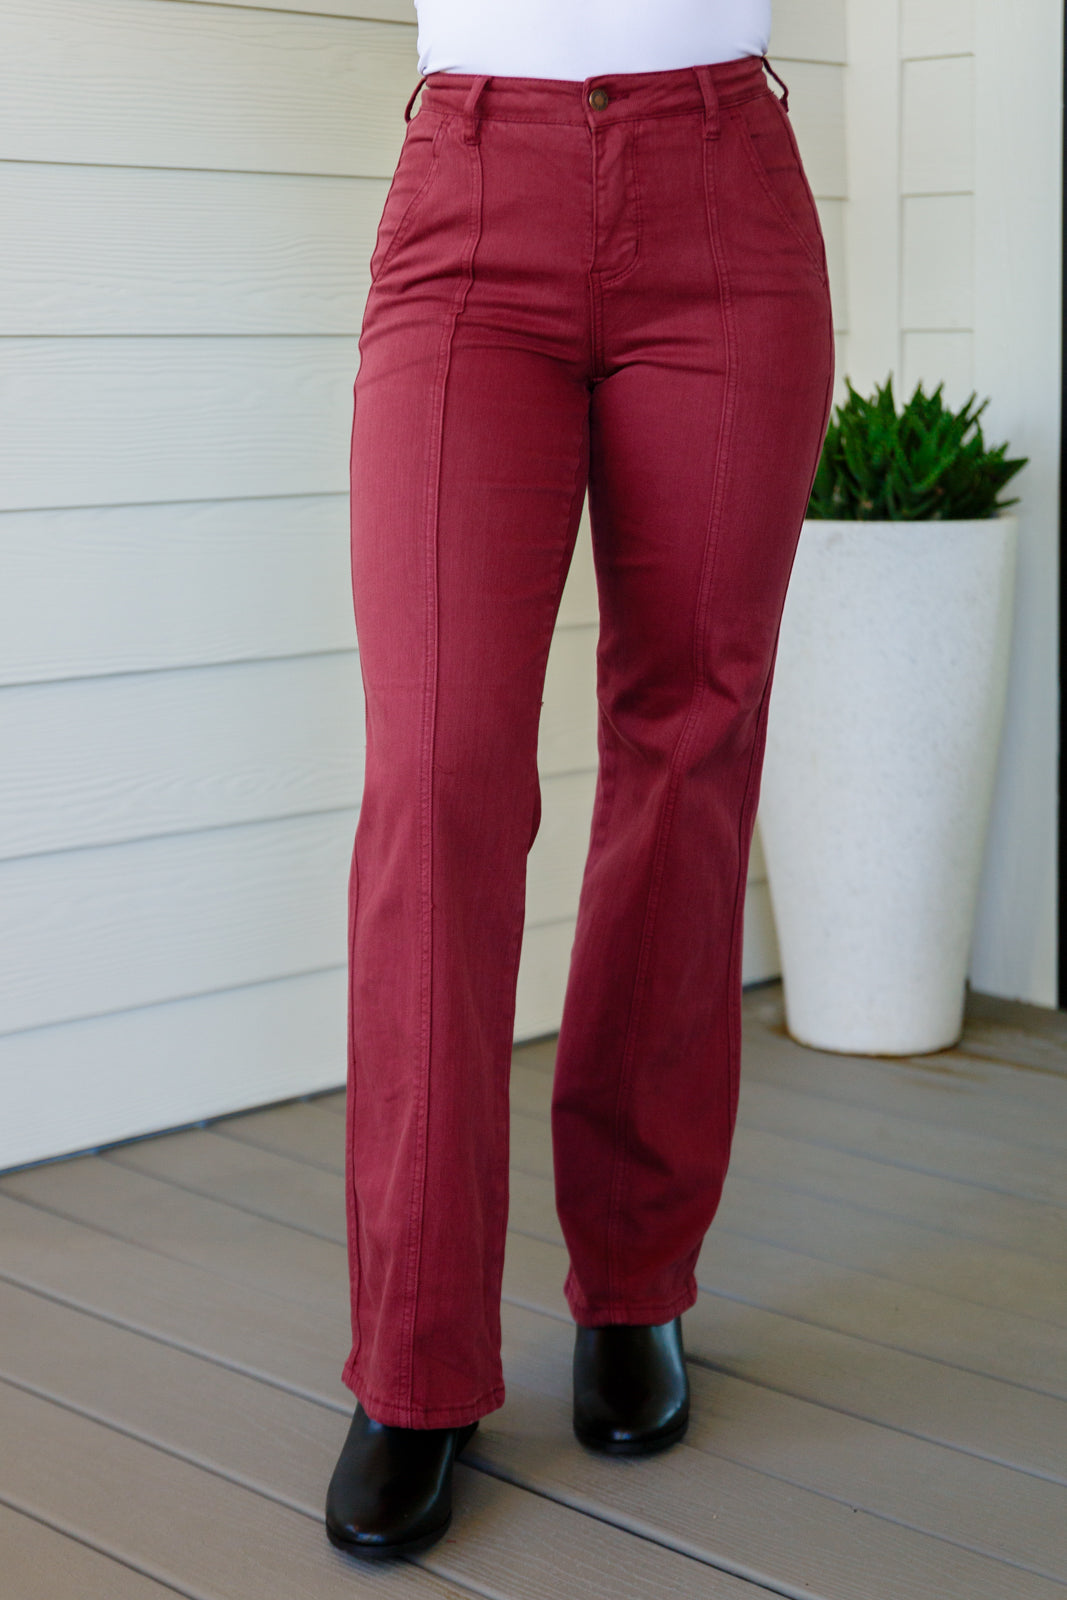 Judy Blue Straight Jeans in Burgundy